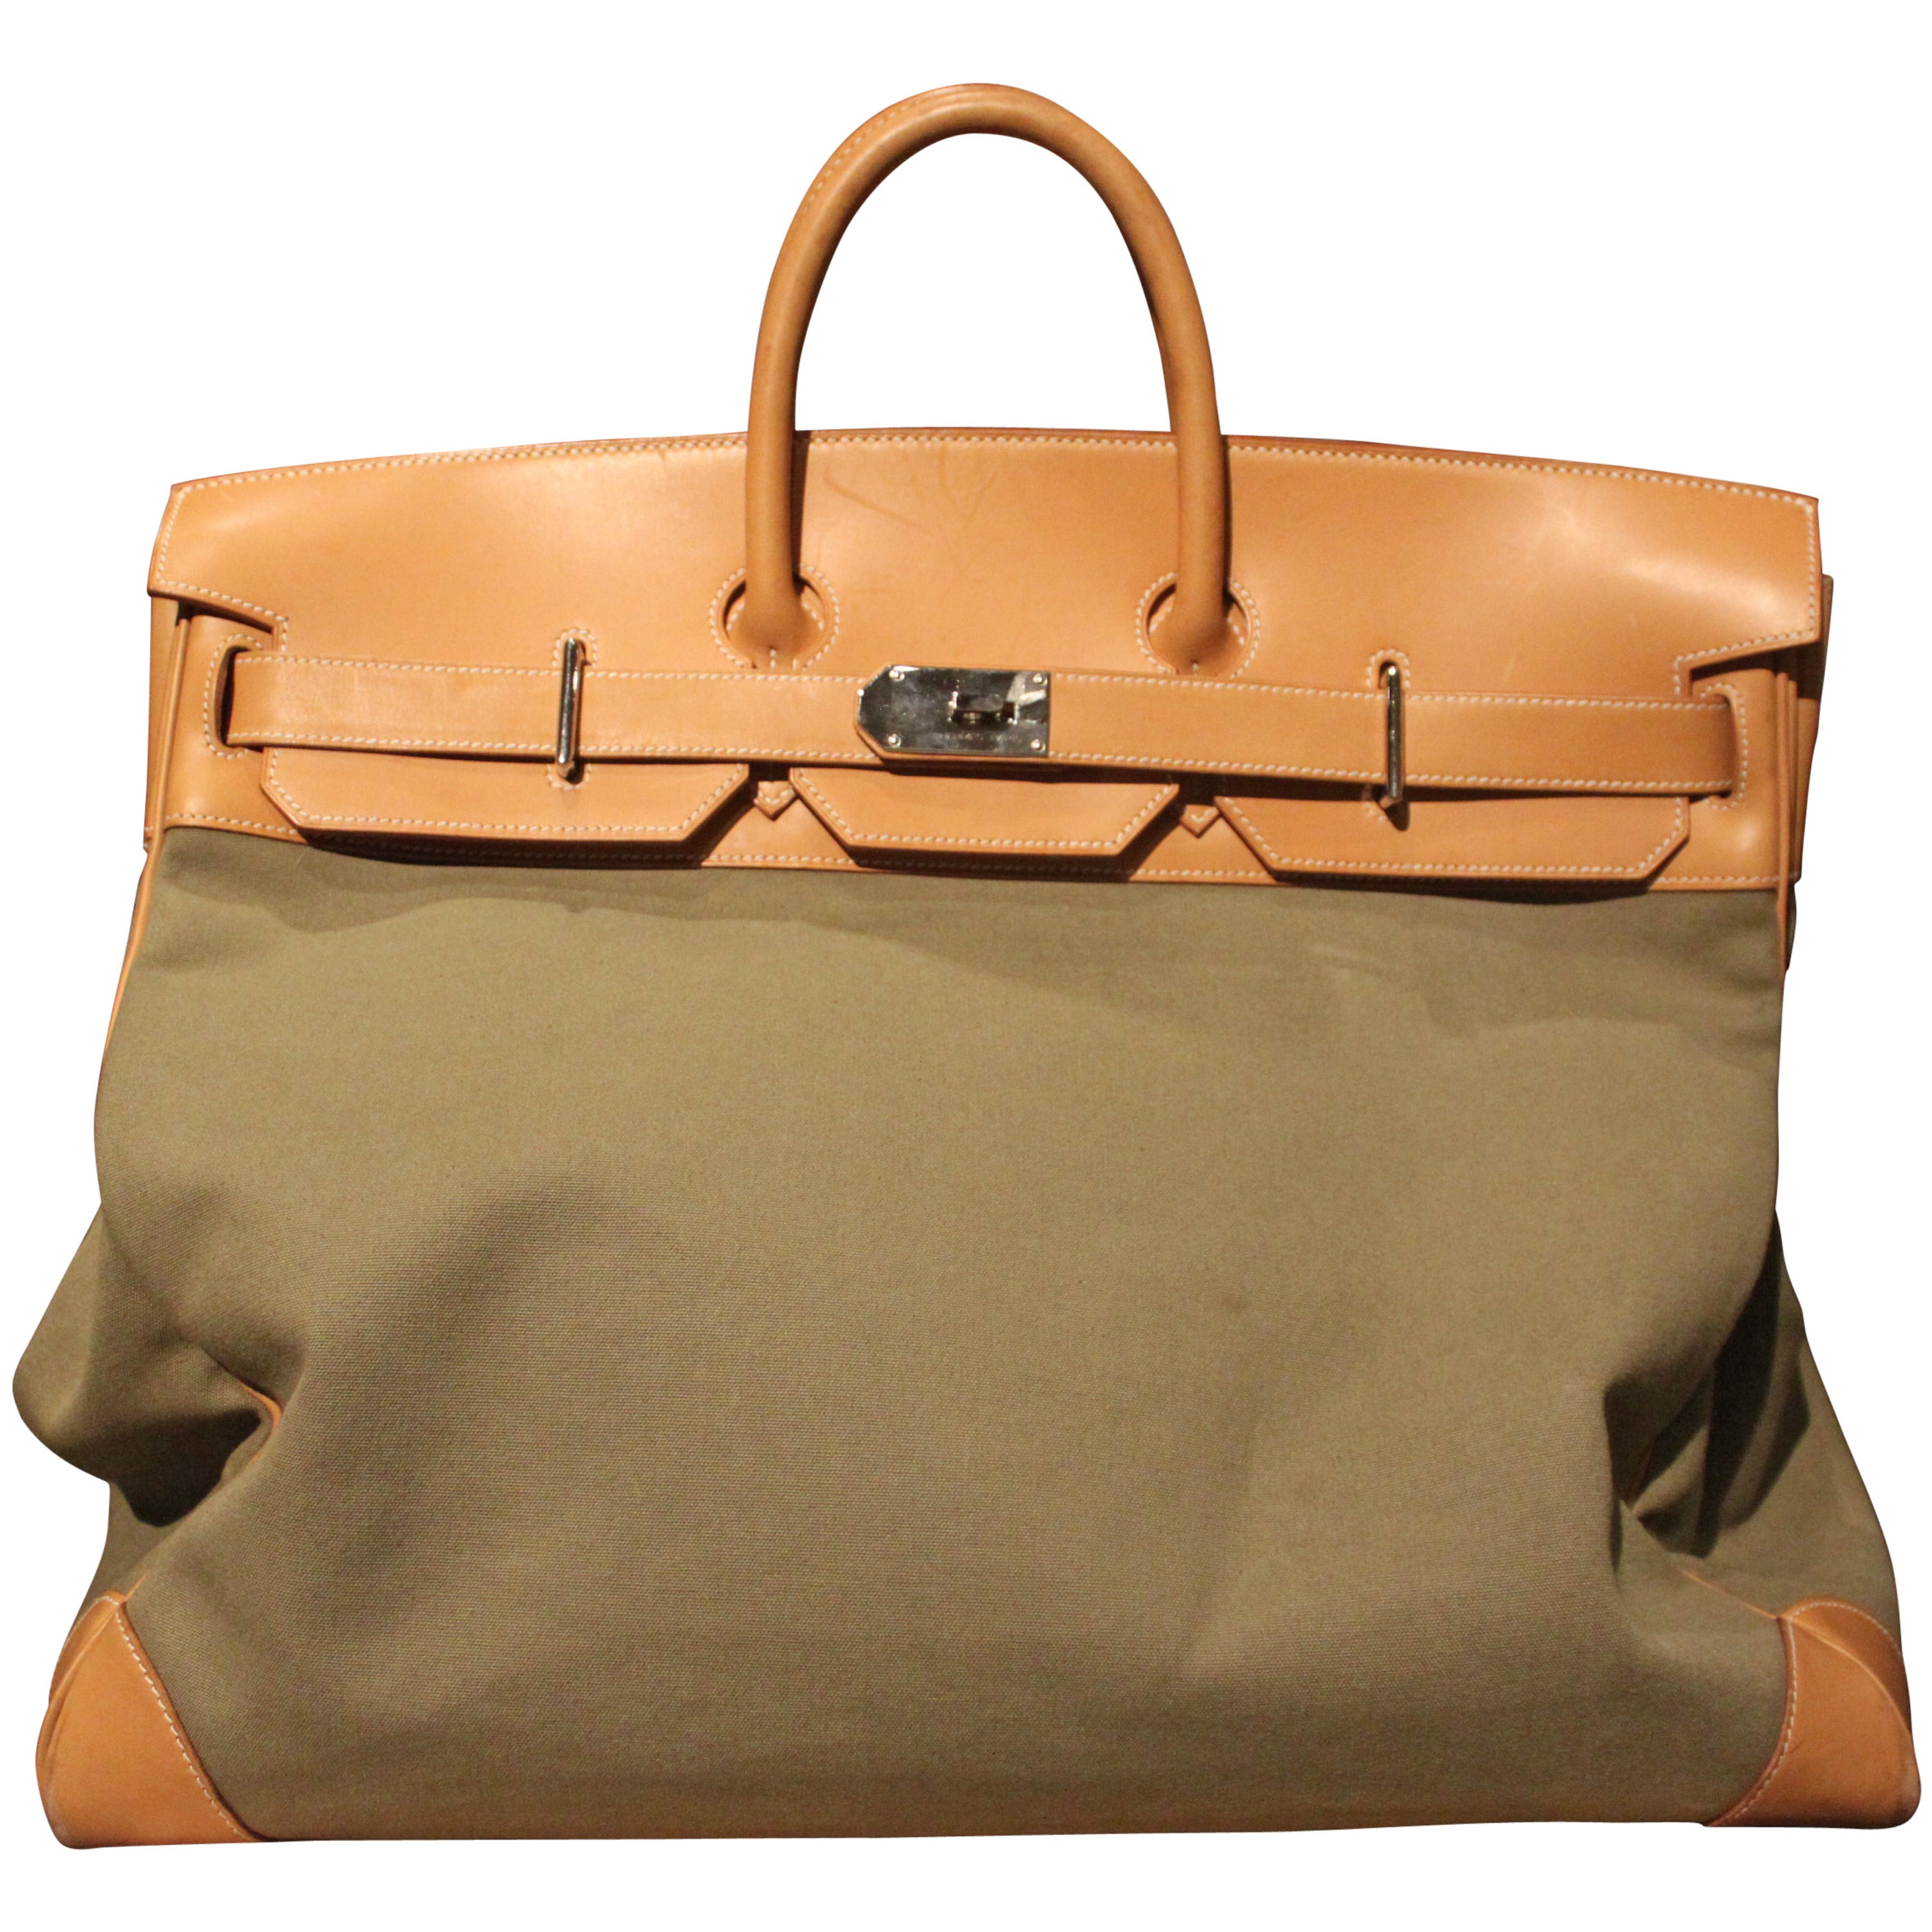 Hermes Canvas and Leather HAC